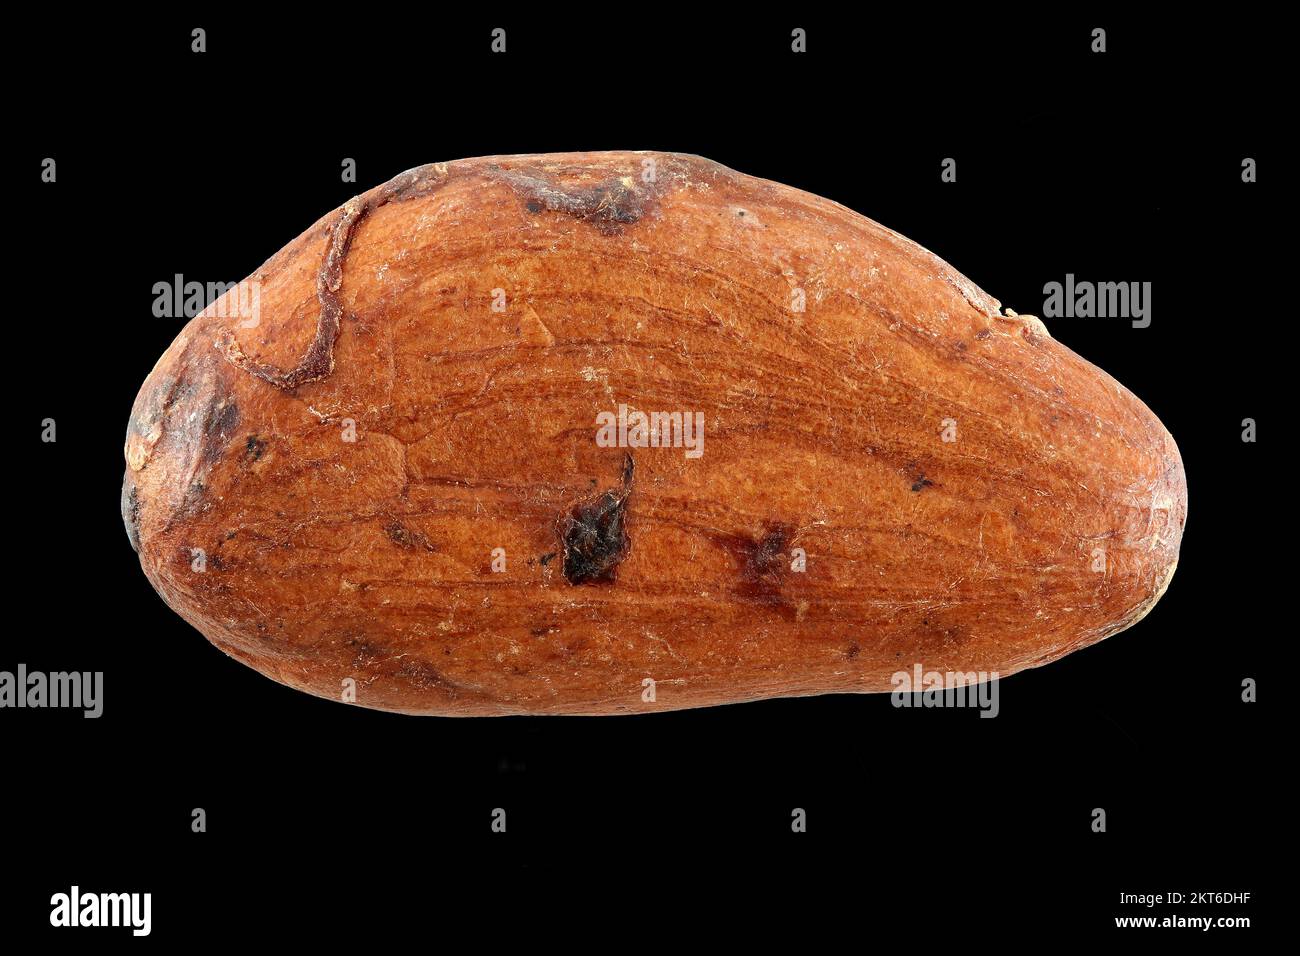 Theobroma cacao, Cacao bean, Kakaobohne, close up, fermented and dried seed with seed coat, 18-26 mm long Stock Photo